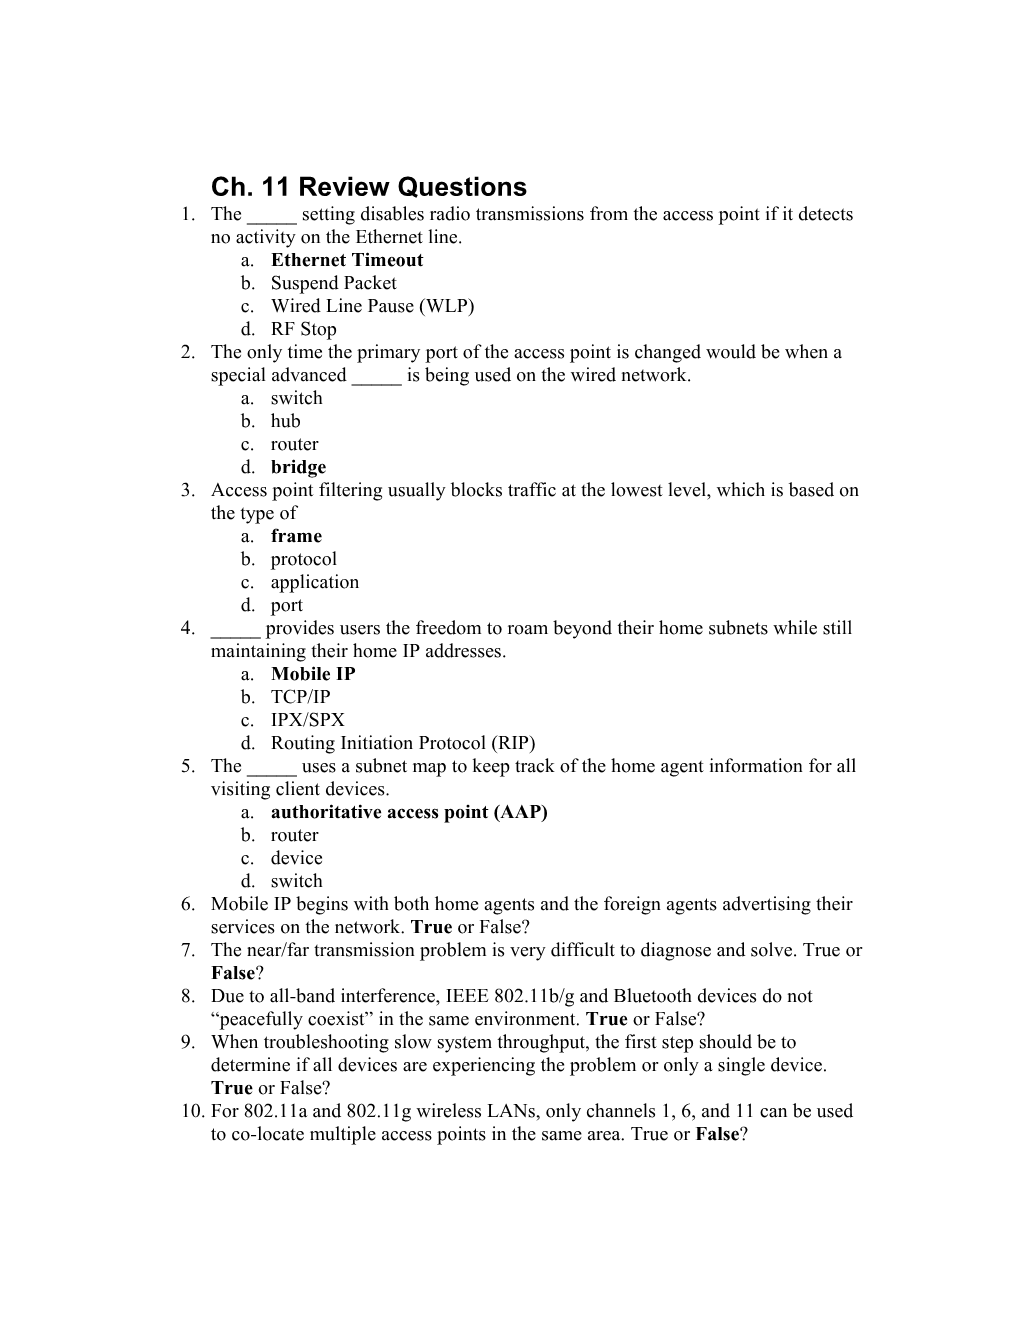 Ch. 11 Review Questions